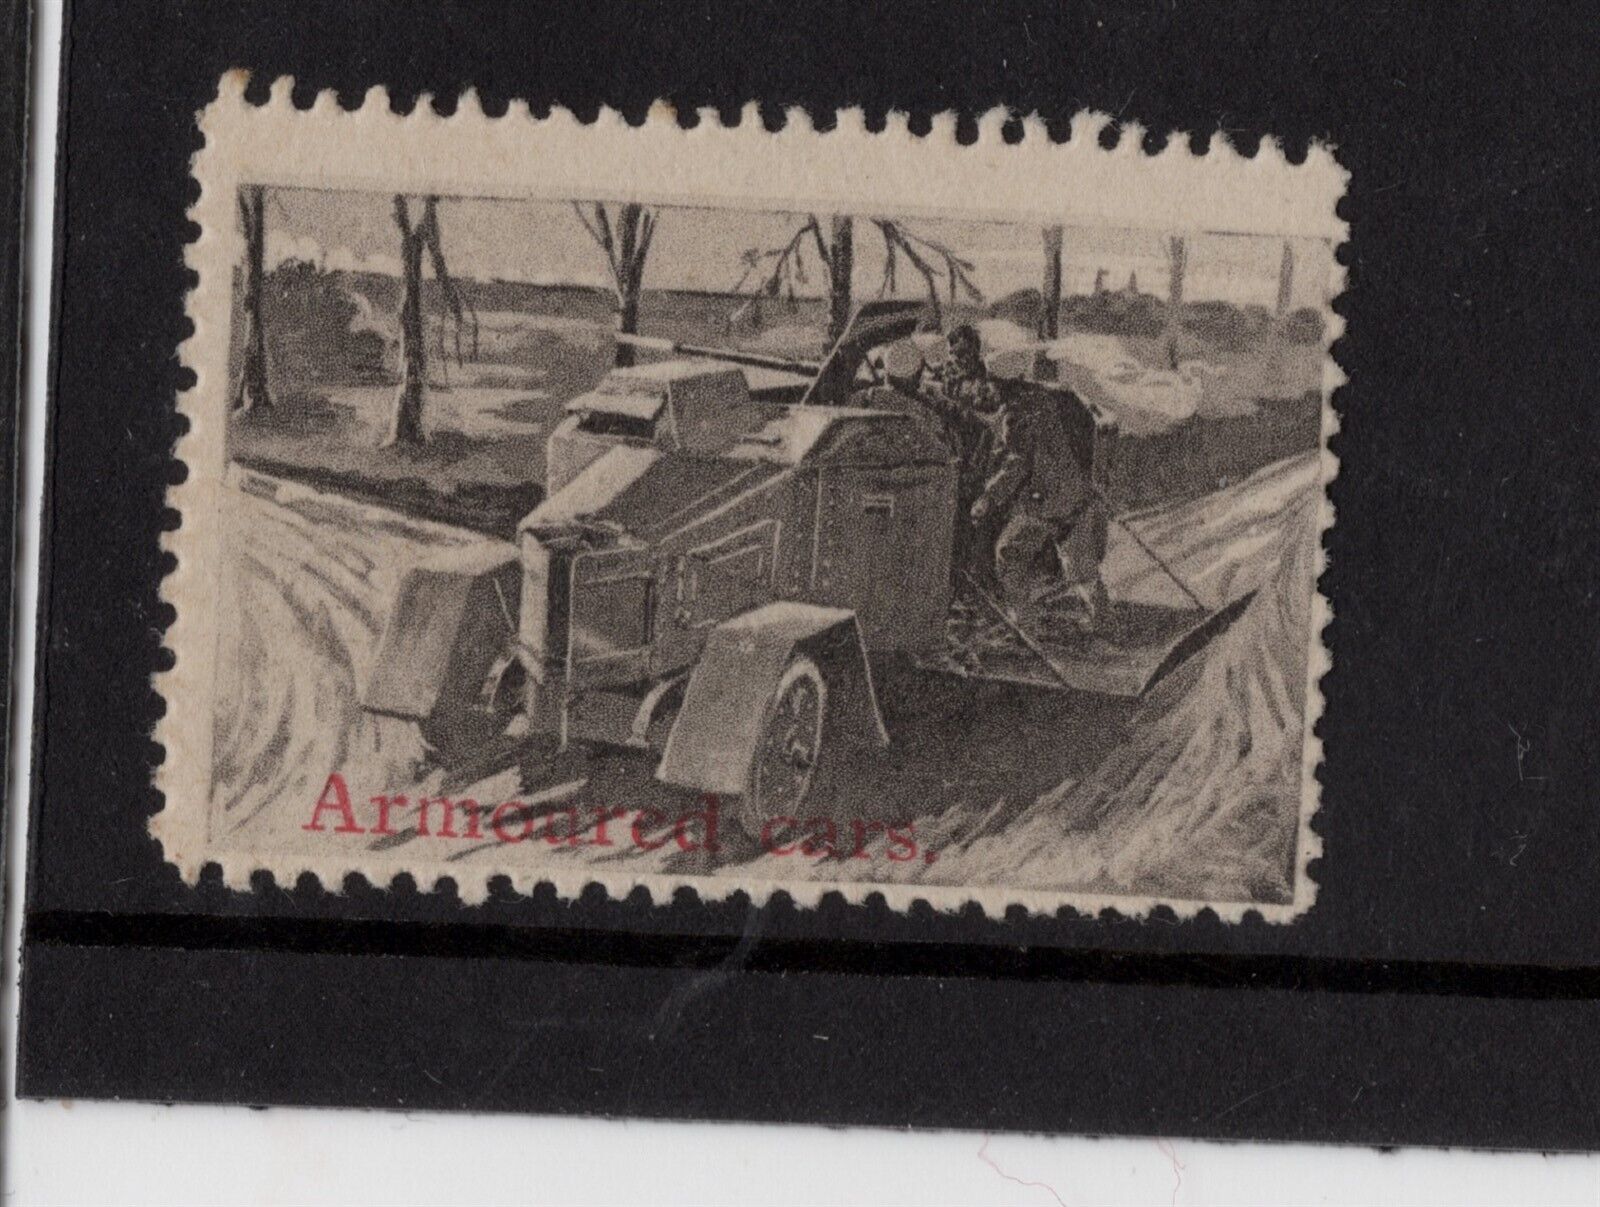 WW I GREAT BRITAIN ARMORED CAR POSTER STAMP